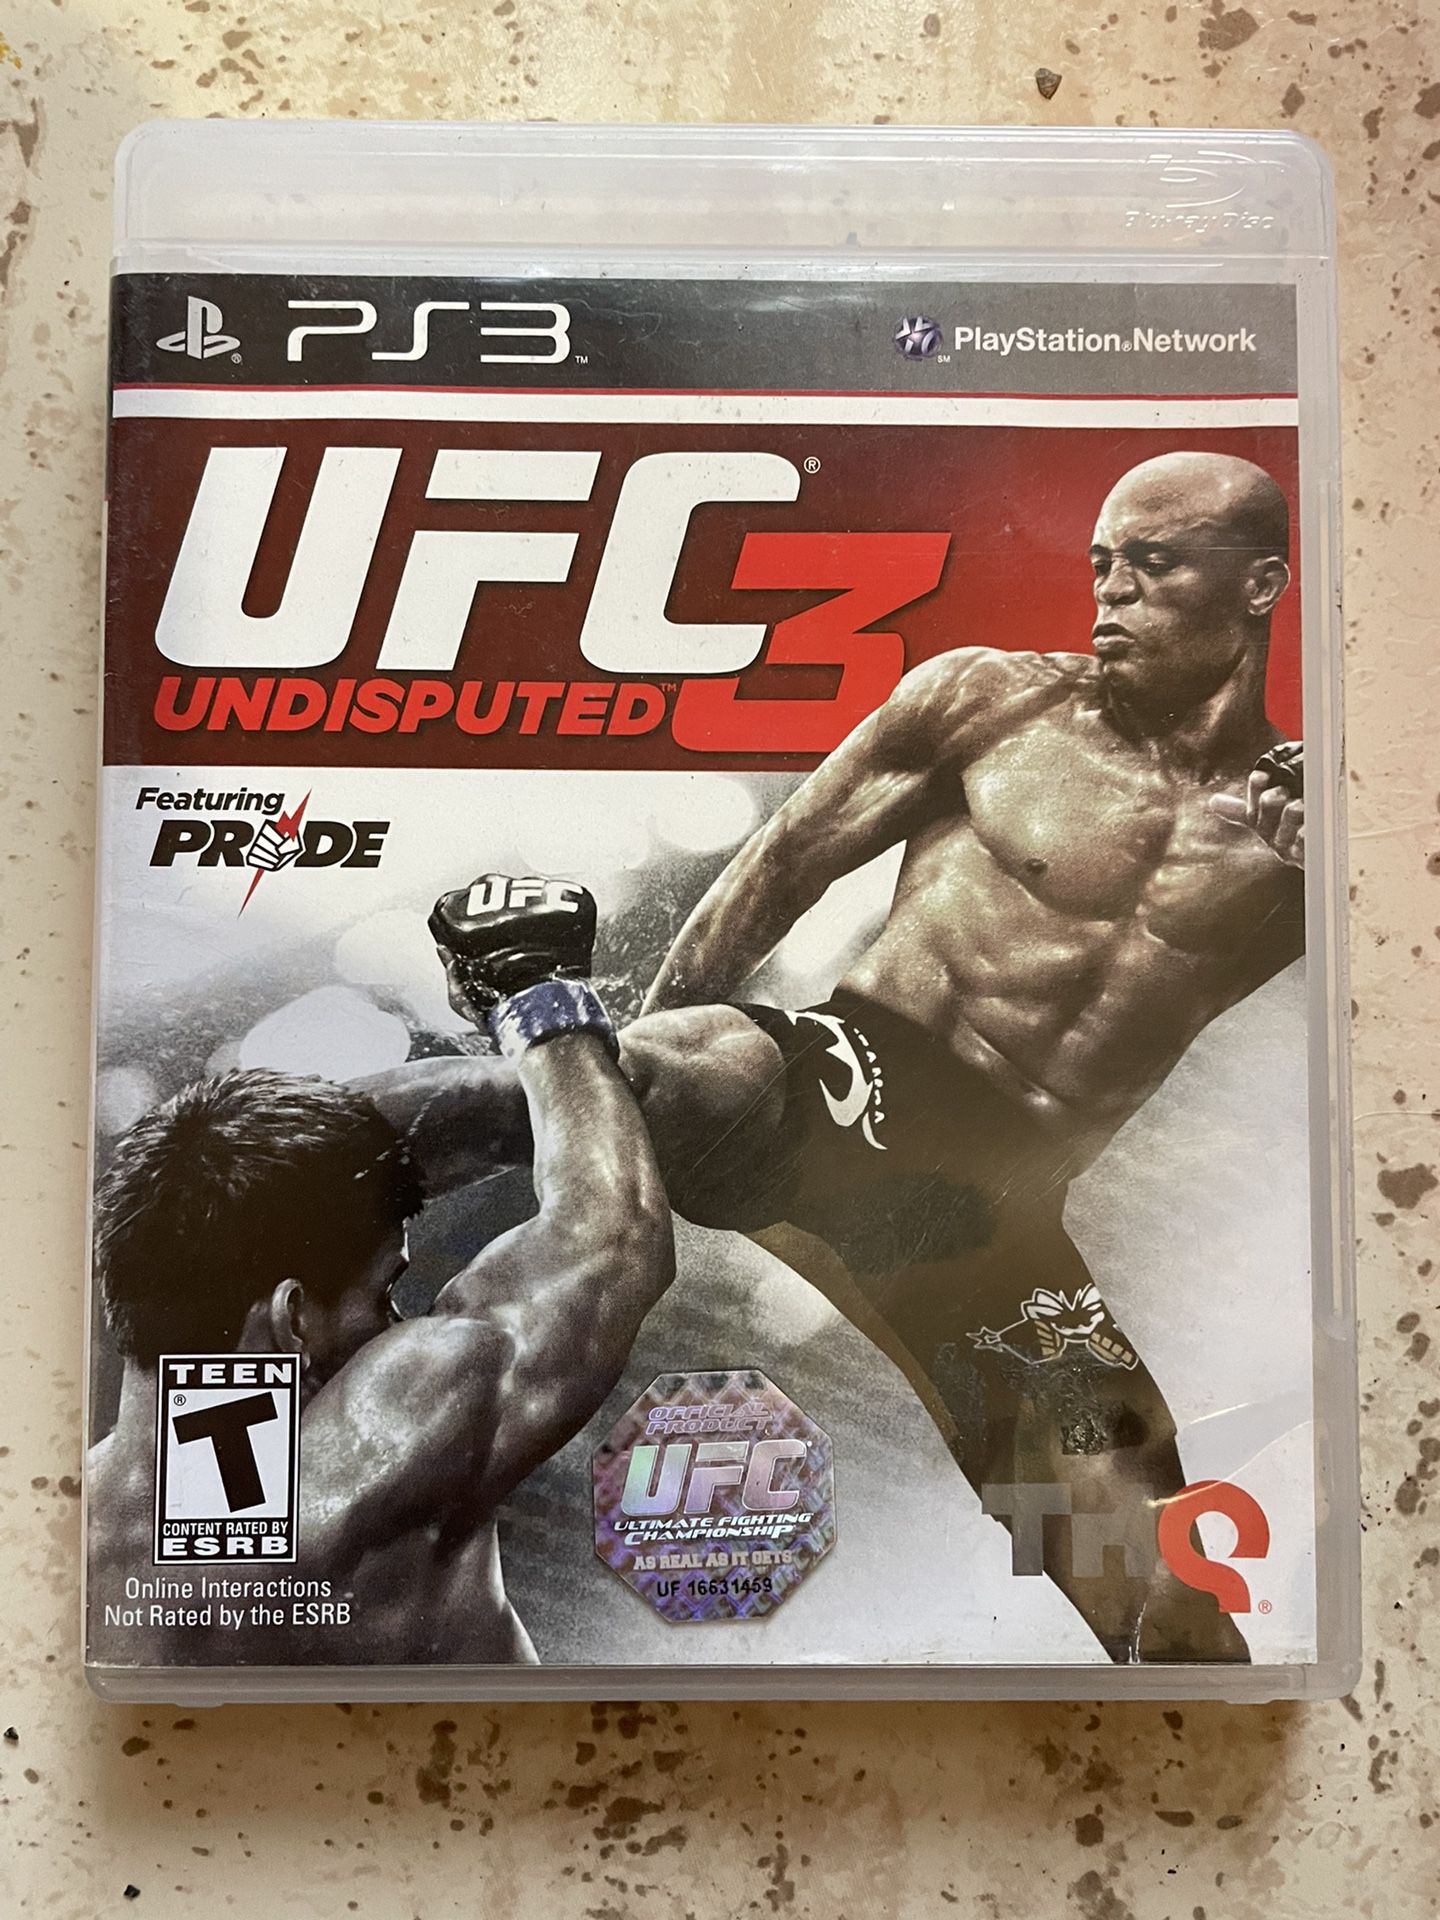 UFC Undisputed 3 PlayStation Game PS3